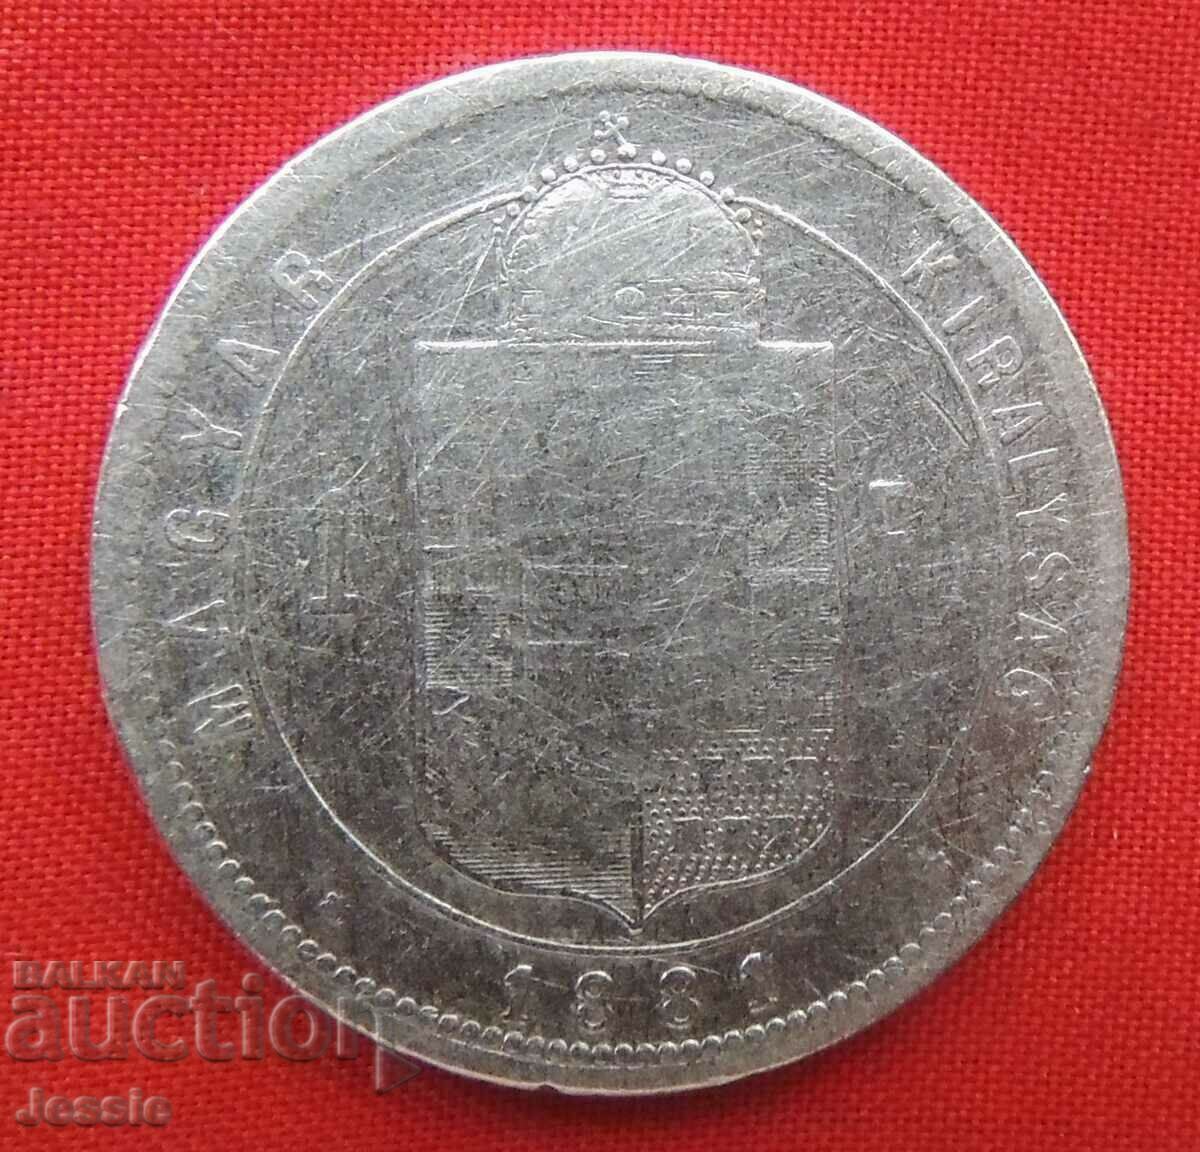 1 forint 1881 Hungary silver